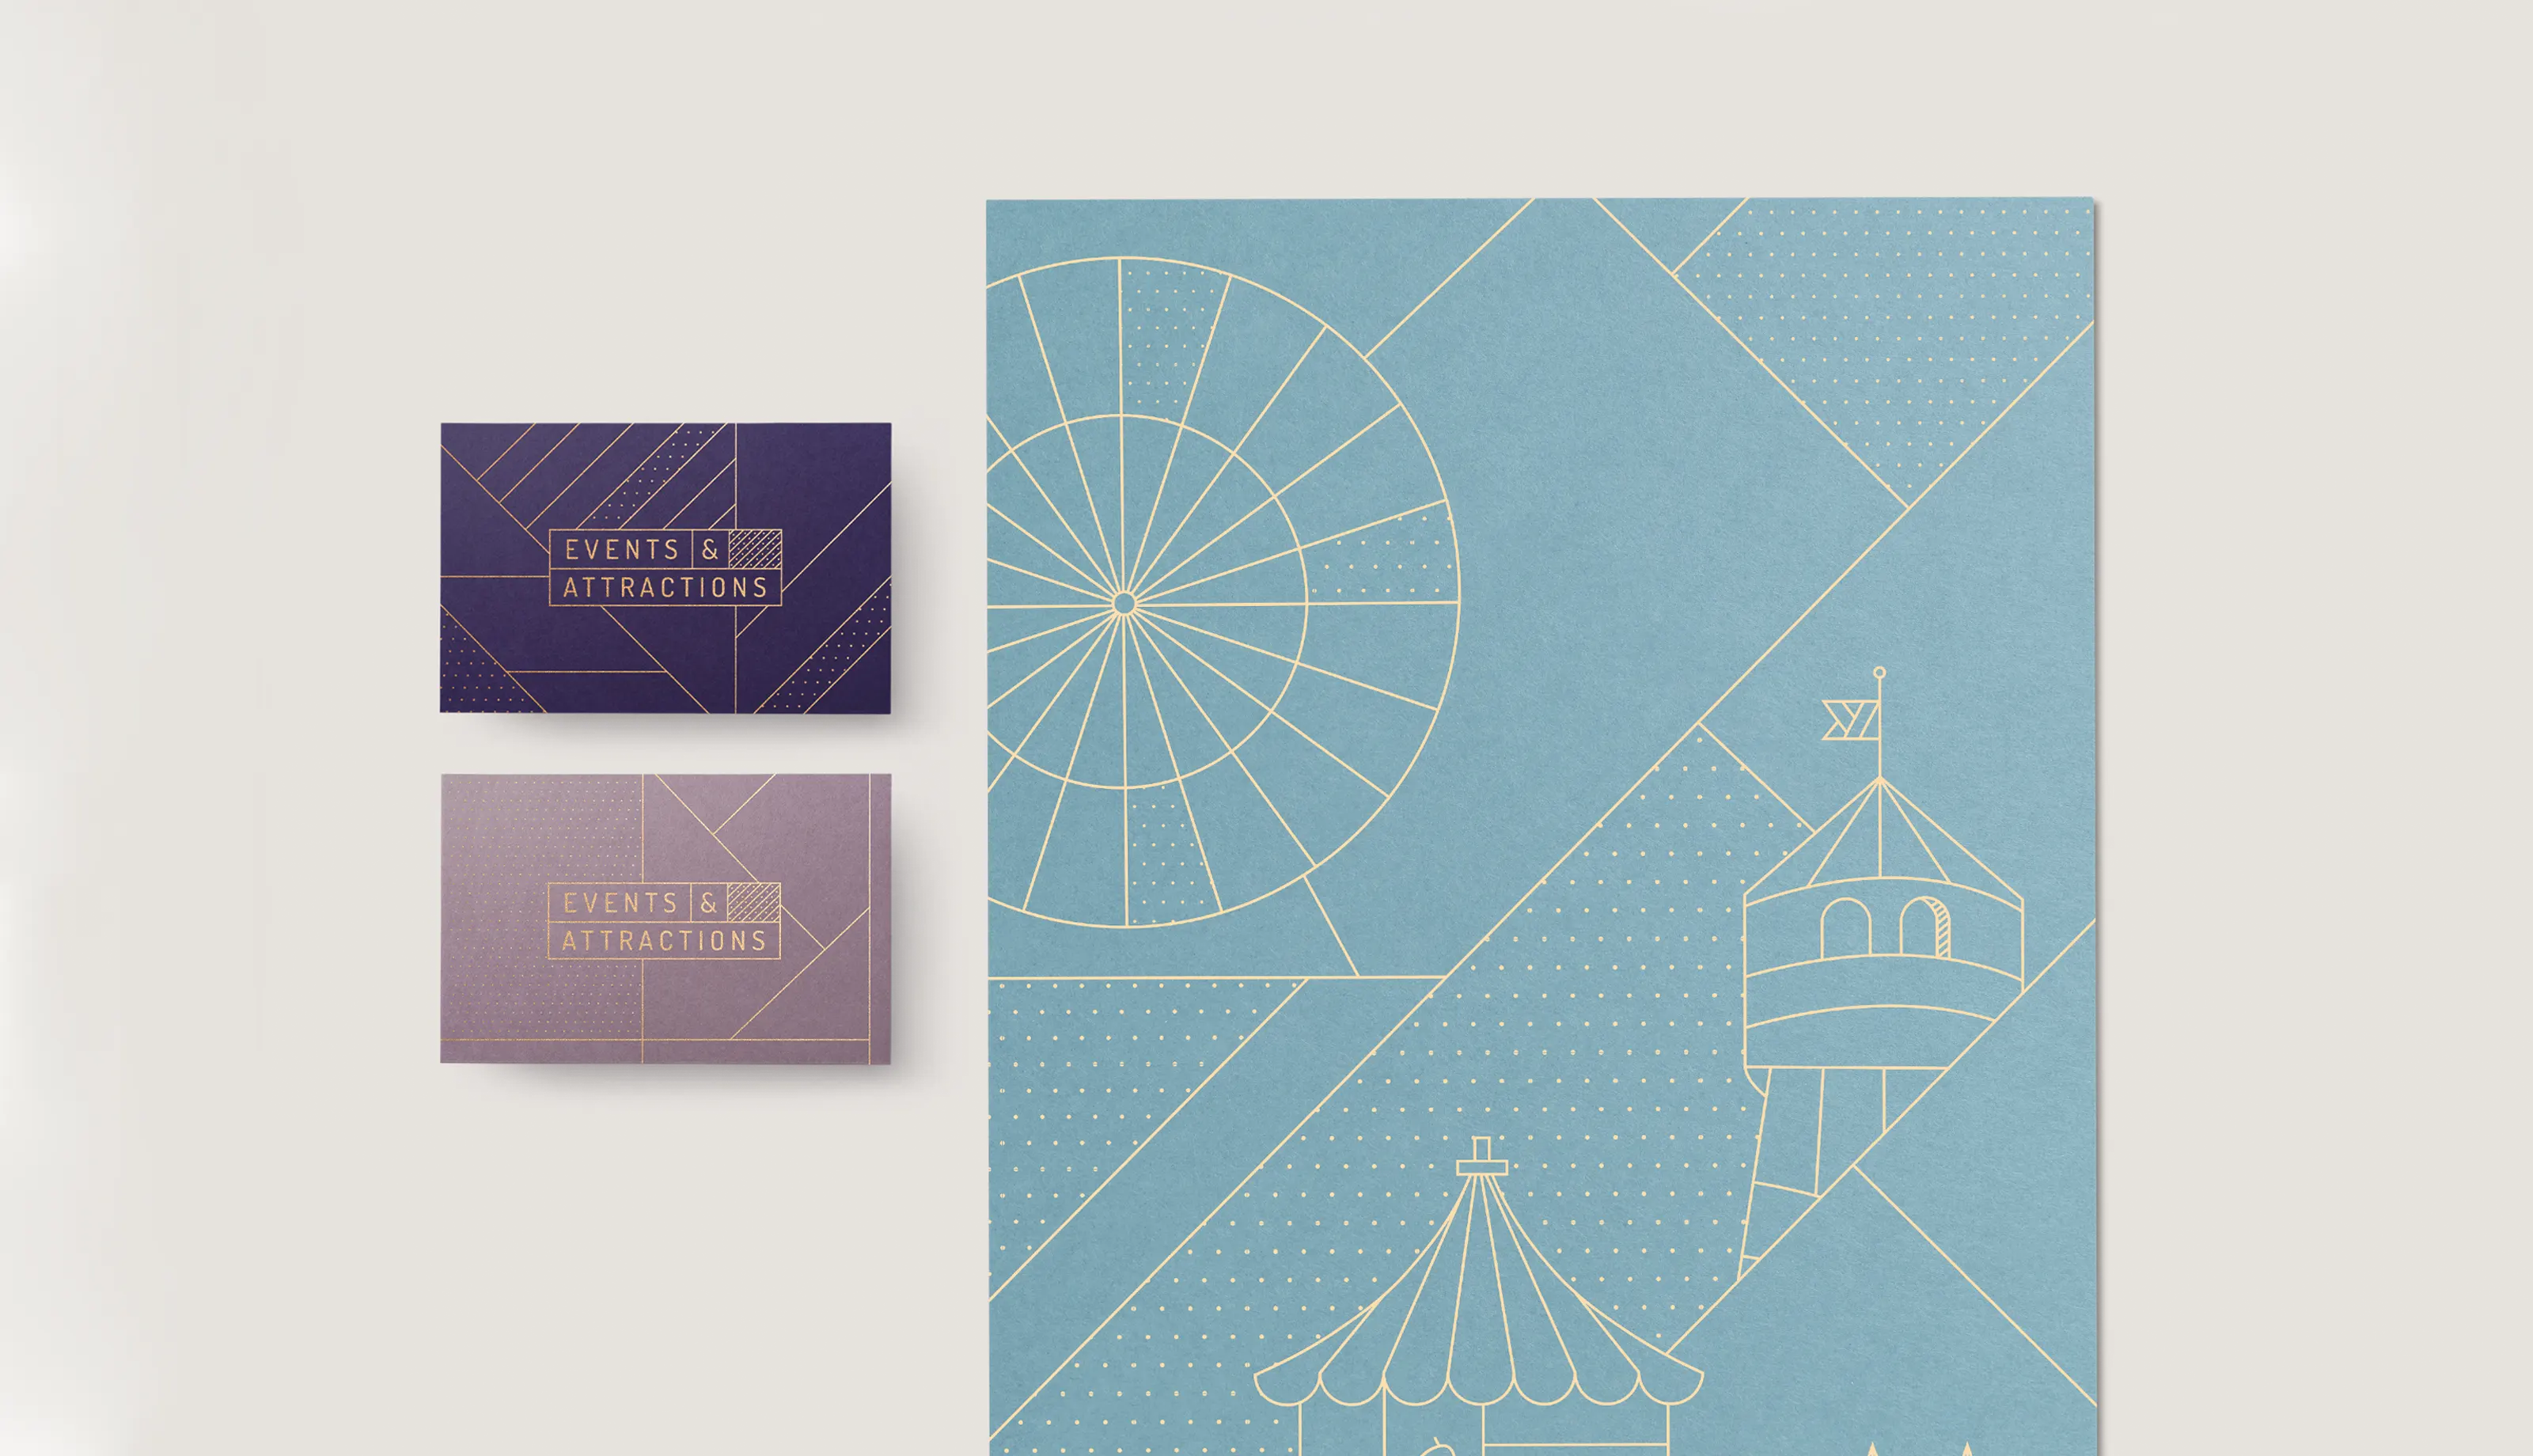 Events & Attractions stationary designs